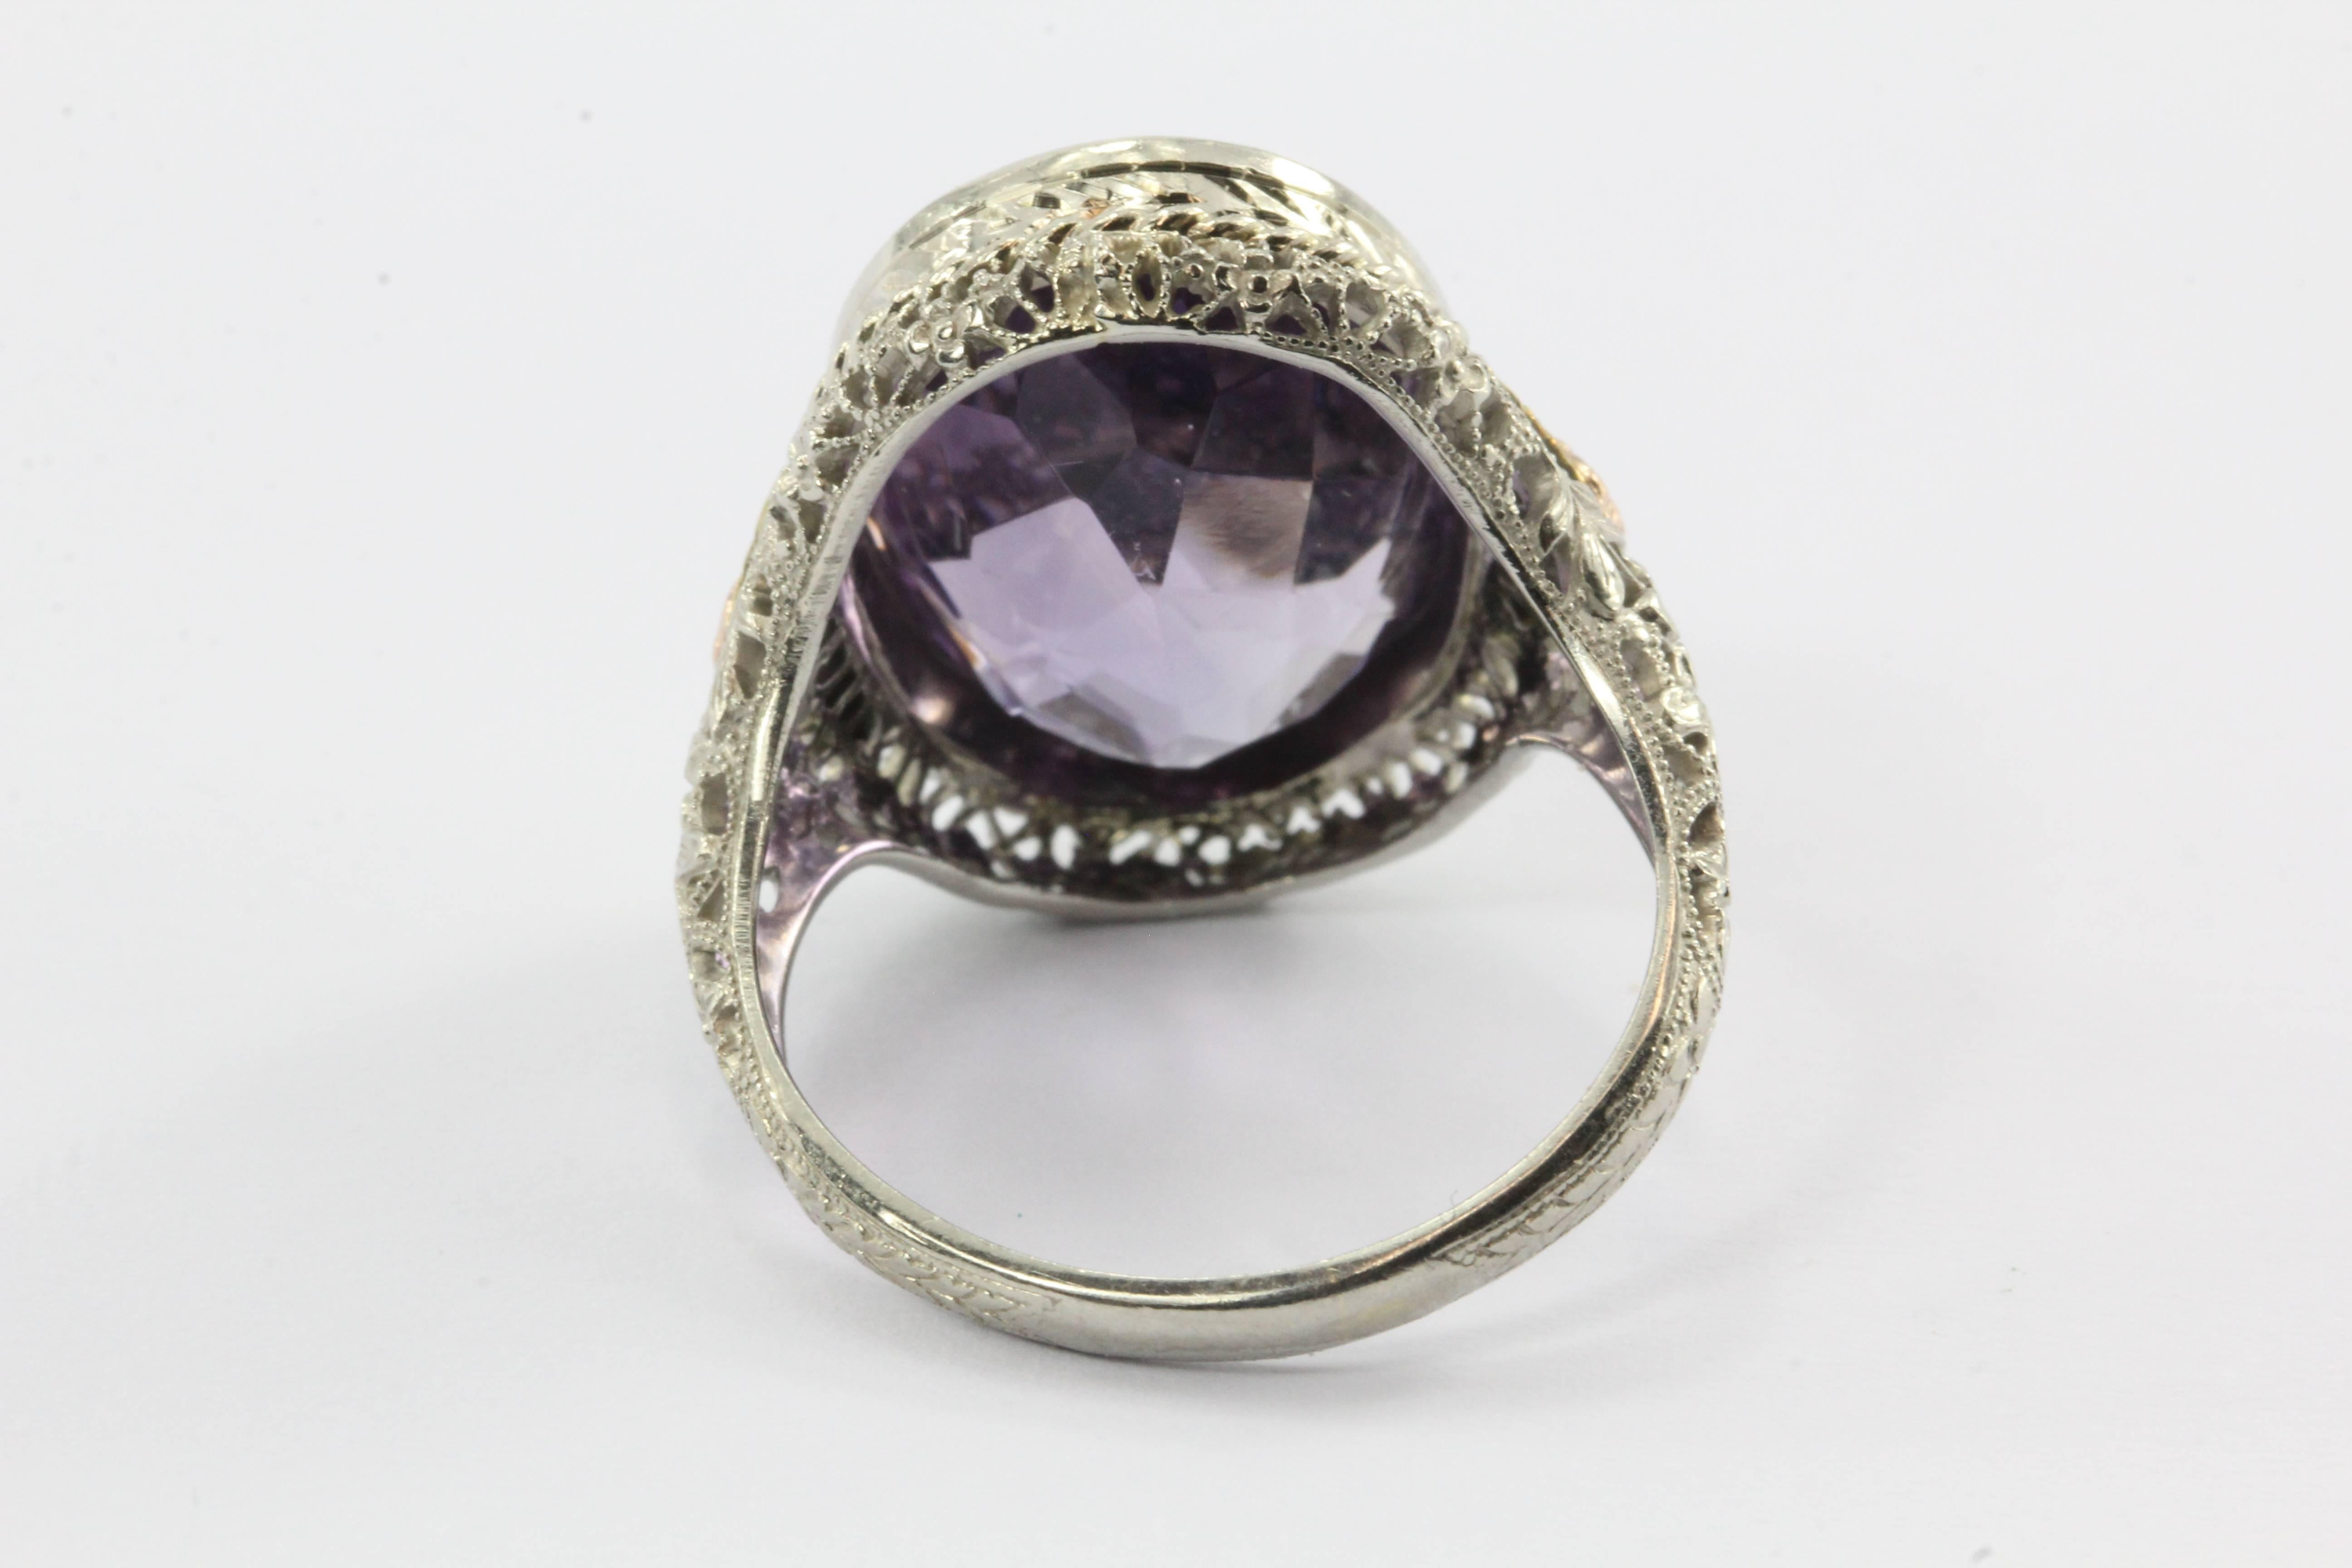 14k Gold and 11 Carat Amethyst Victorian Revival Ring 1